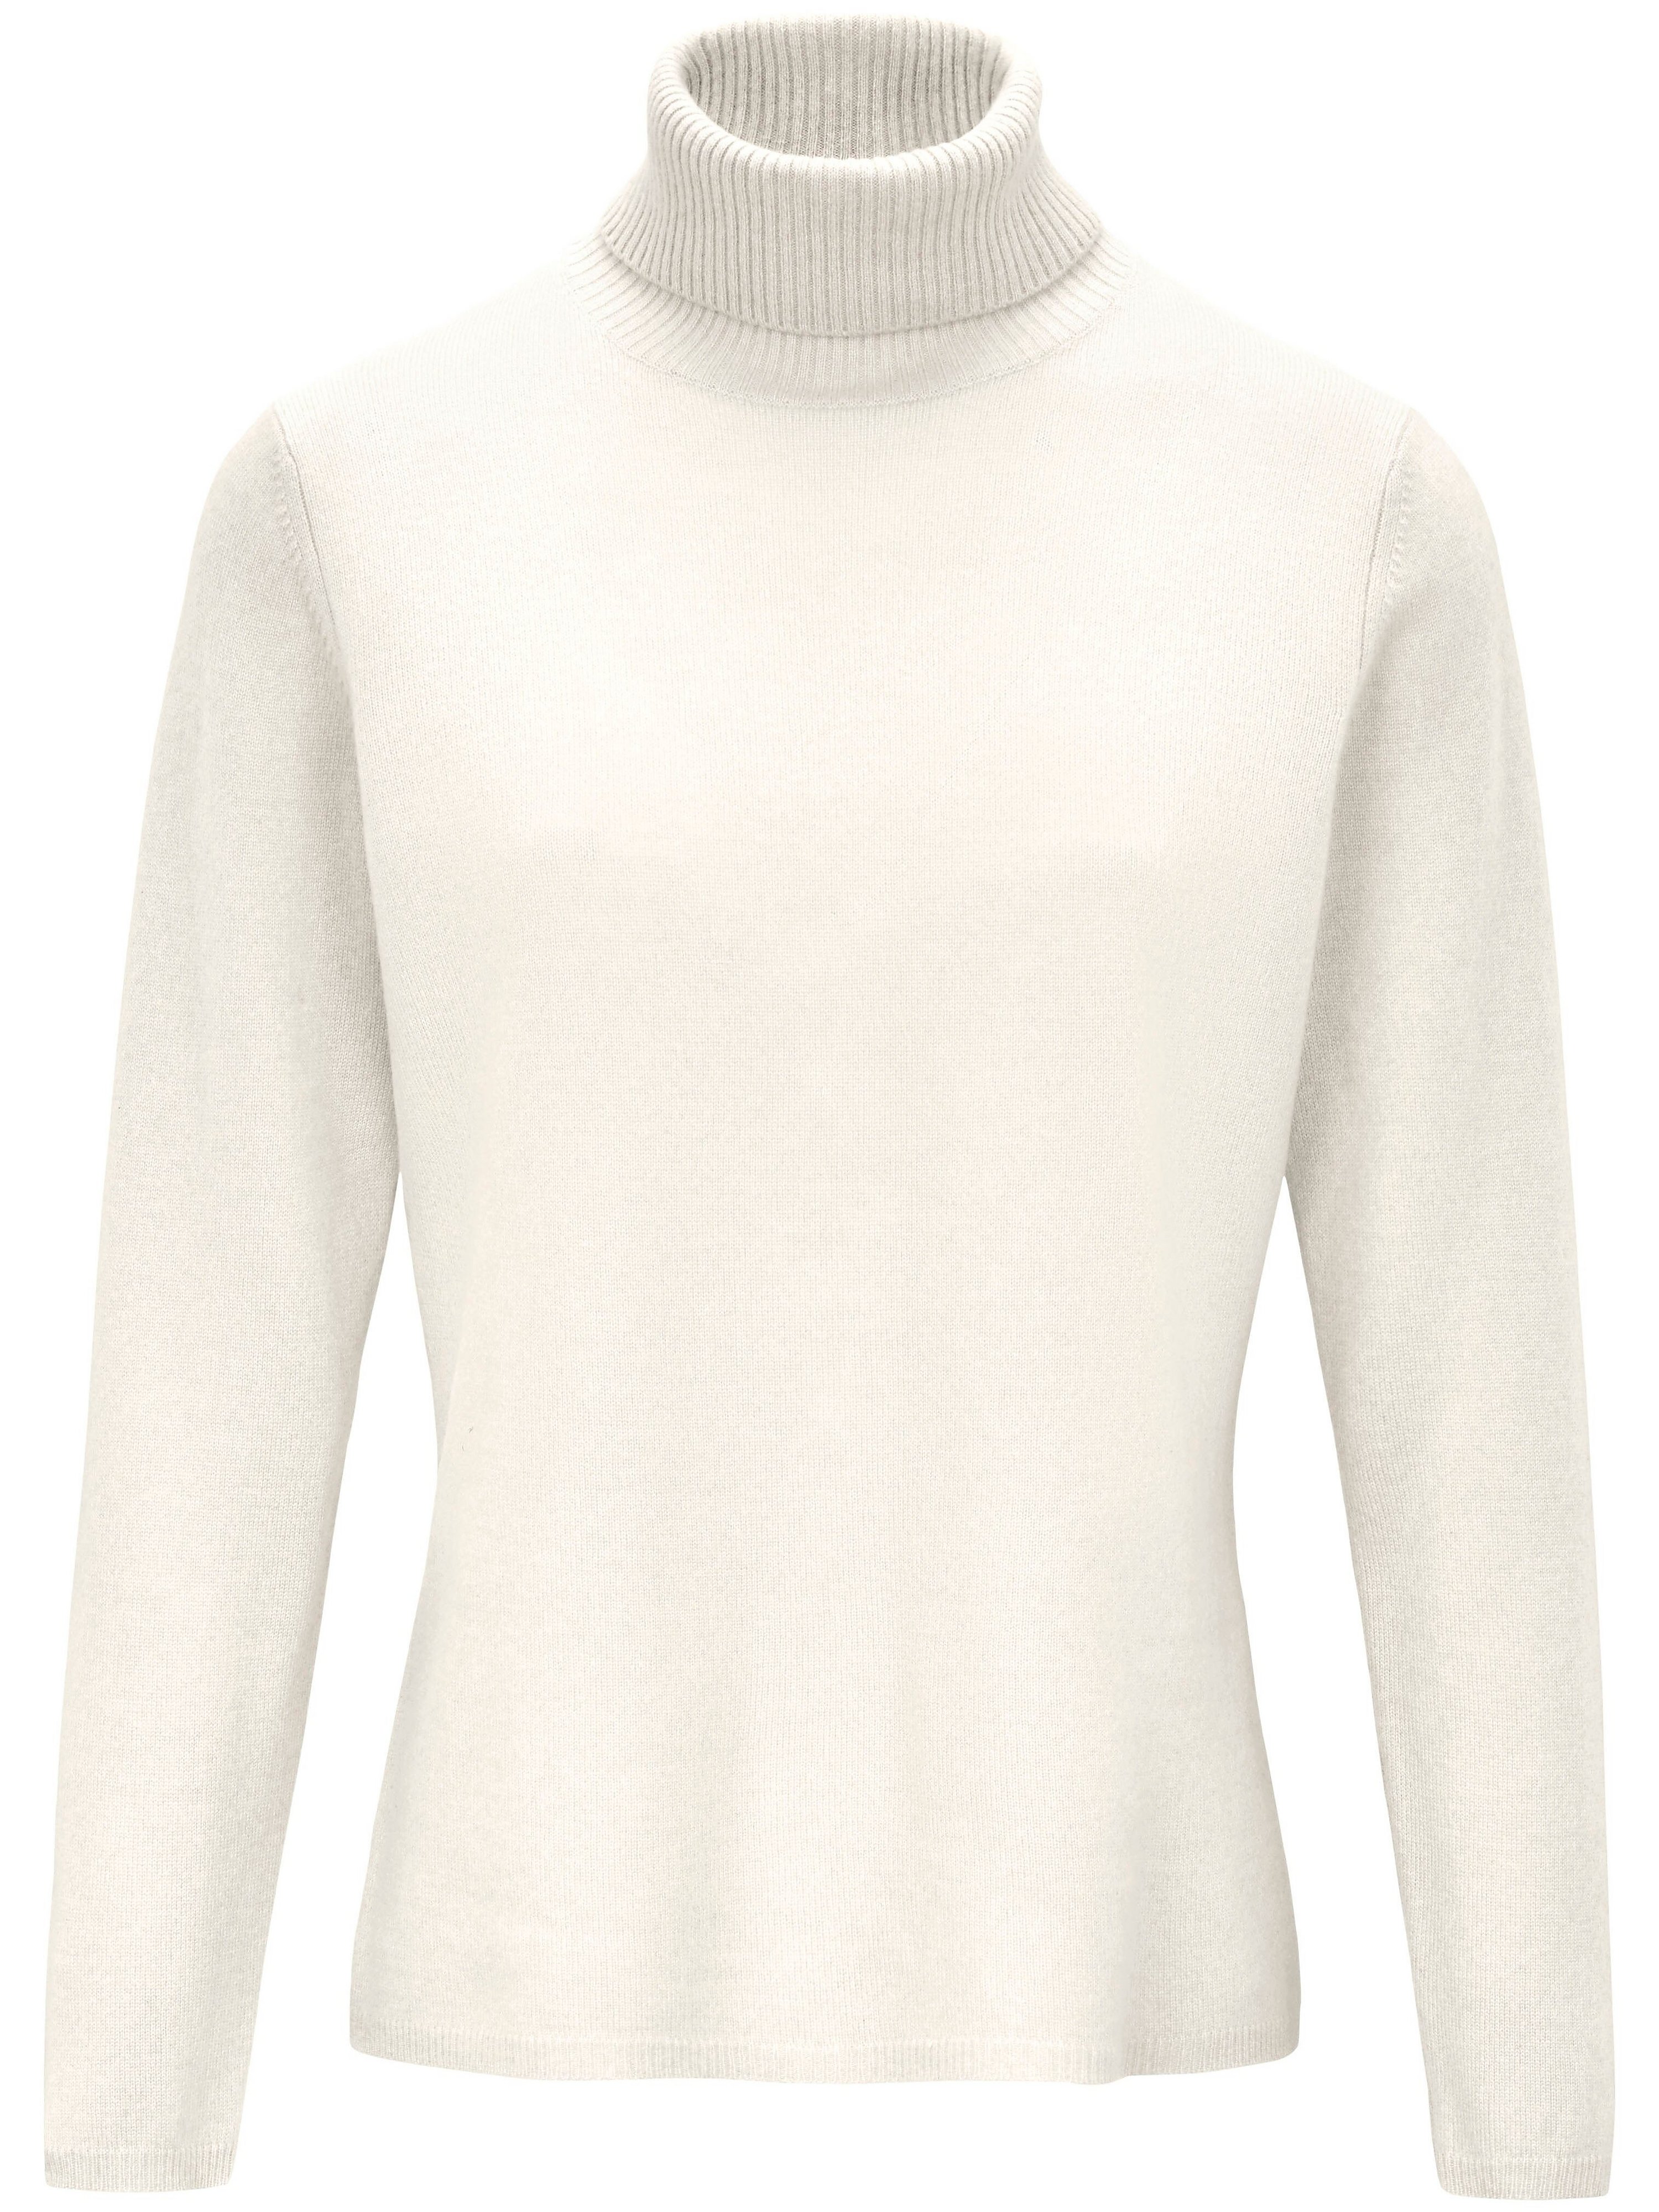 Le pull col roulé  include blanc taille 48